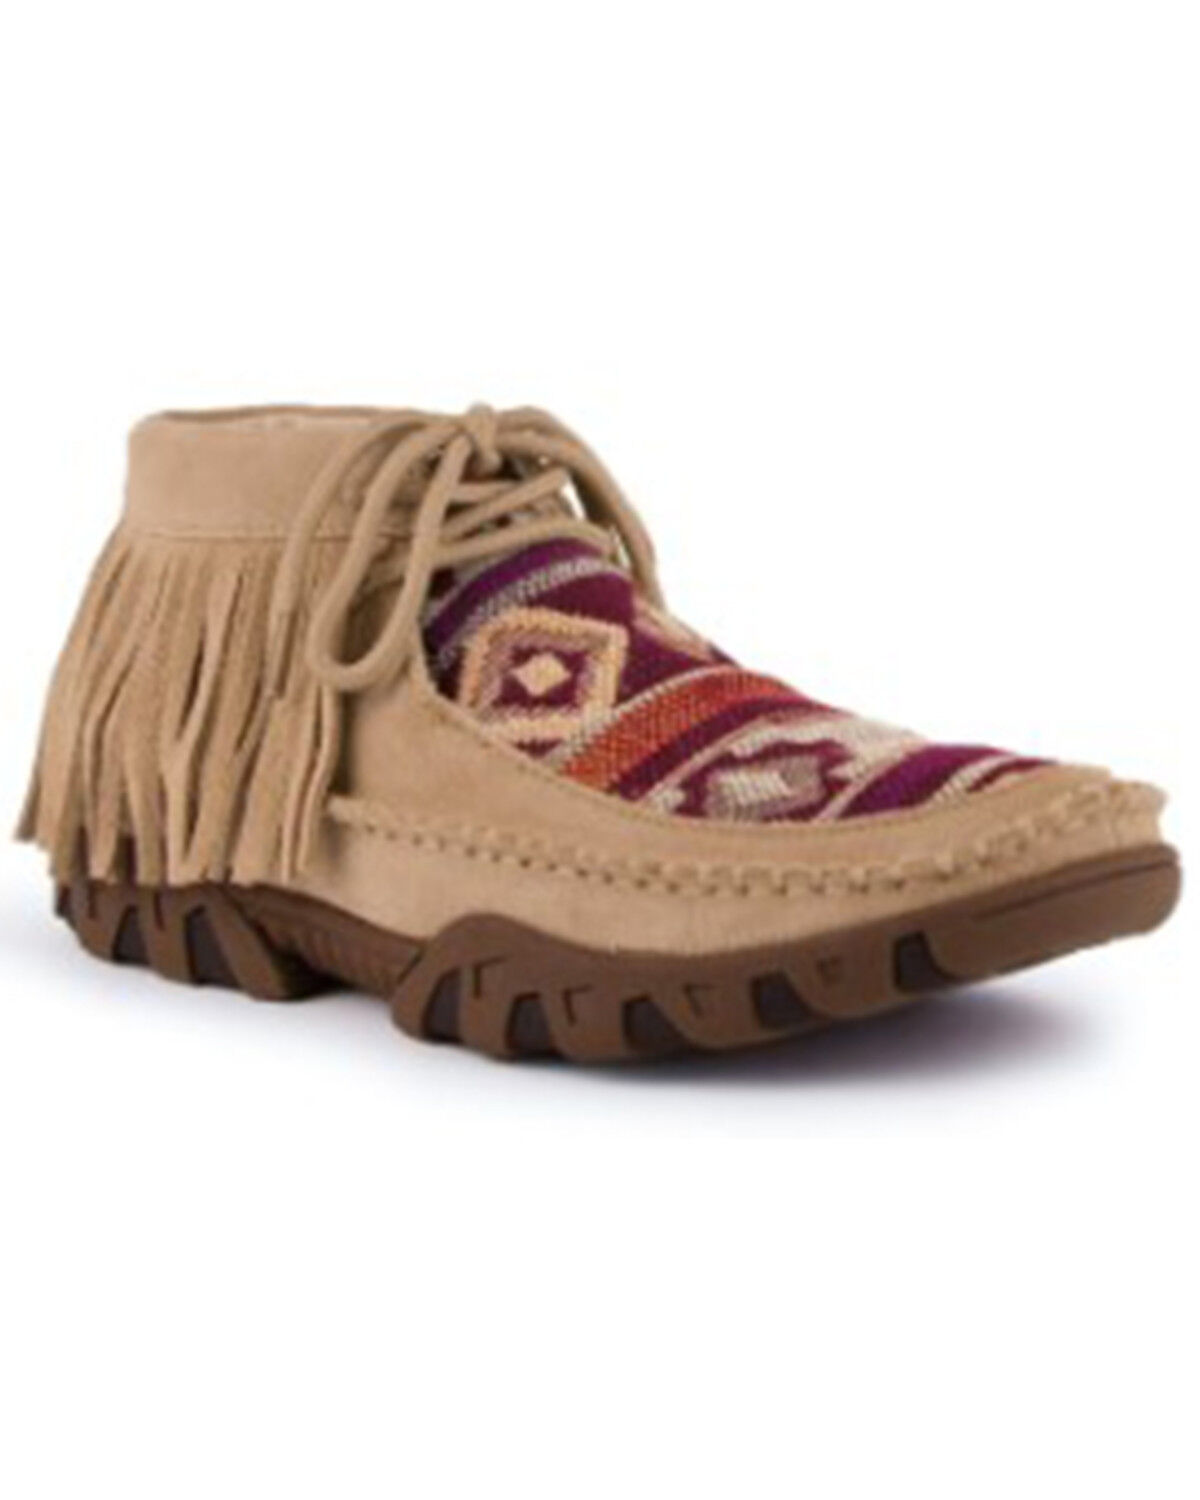 tan moccasin boots